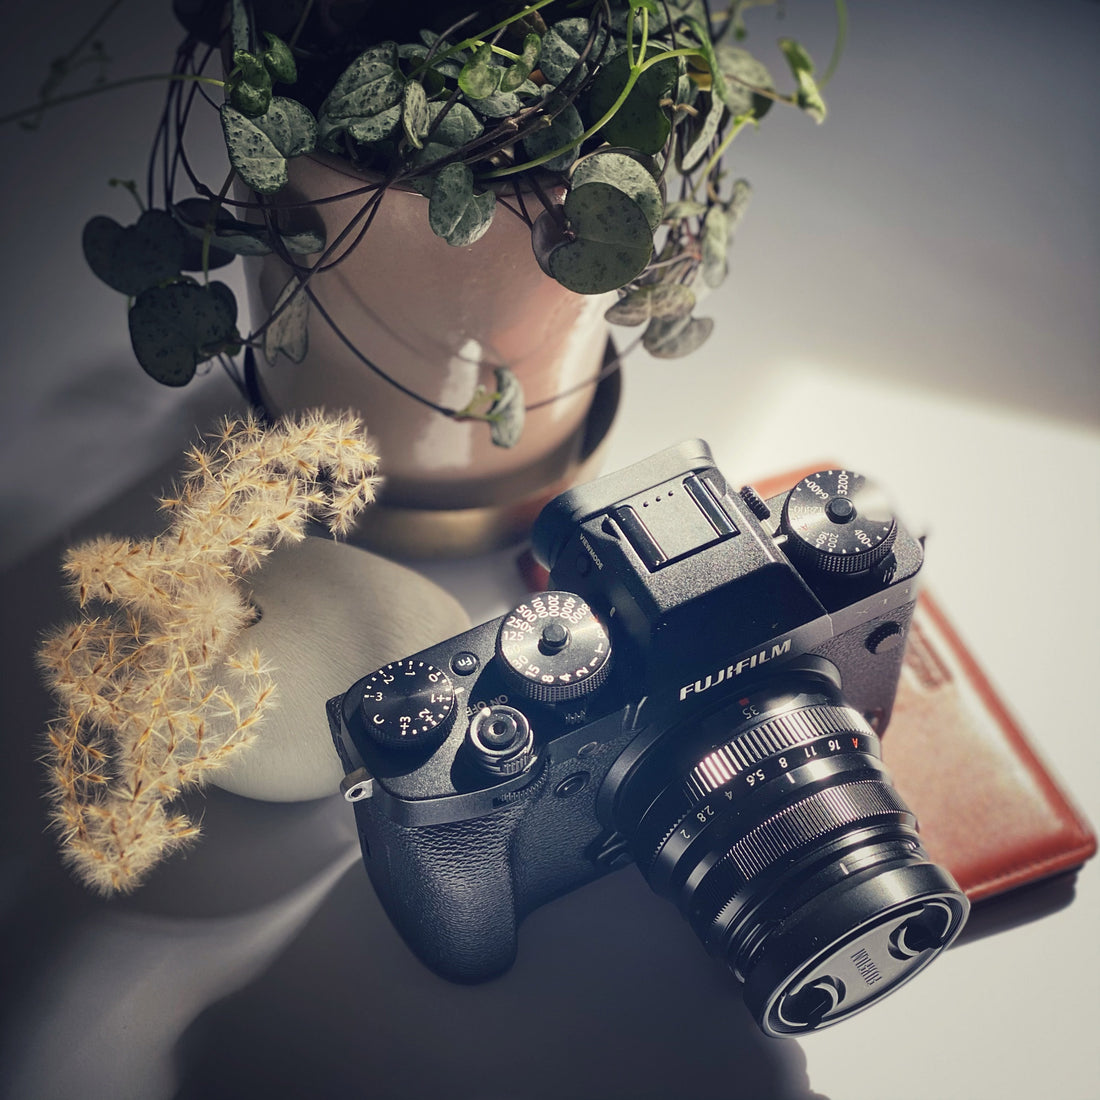 camera with plant, grass and a leather case in front of a white background with shadows